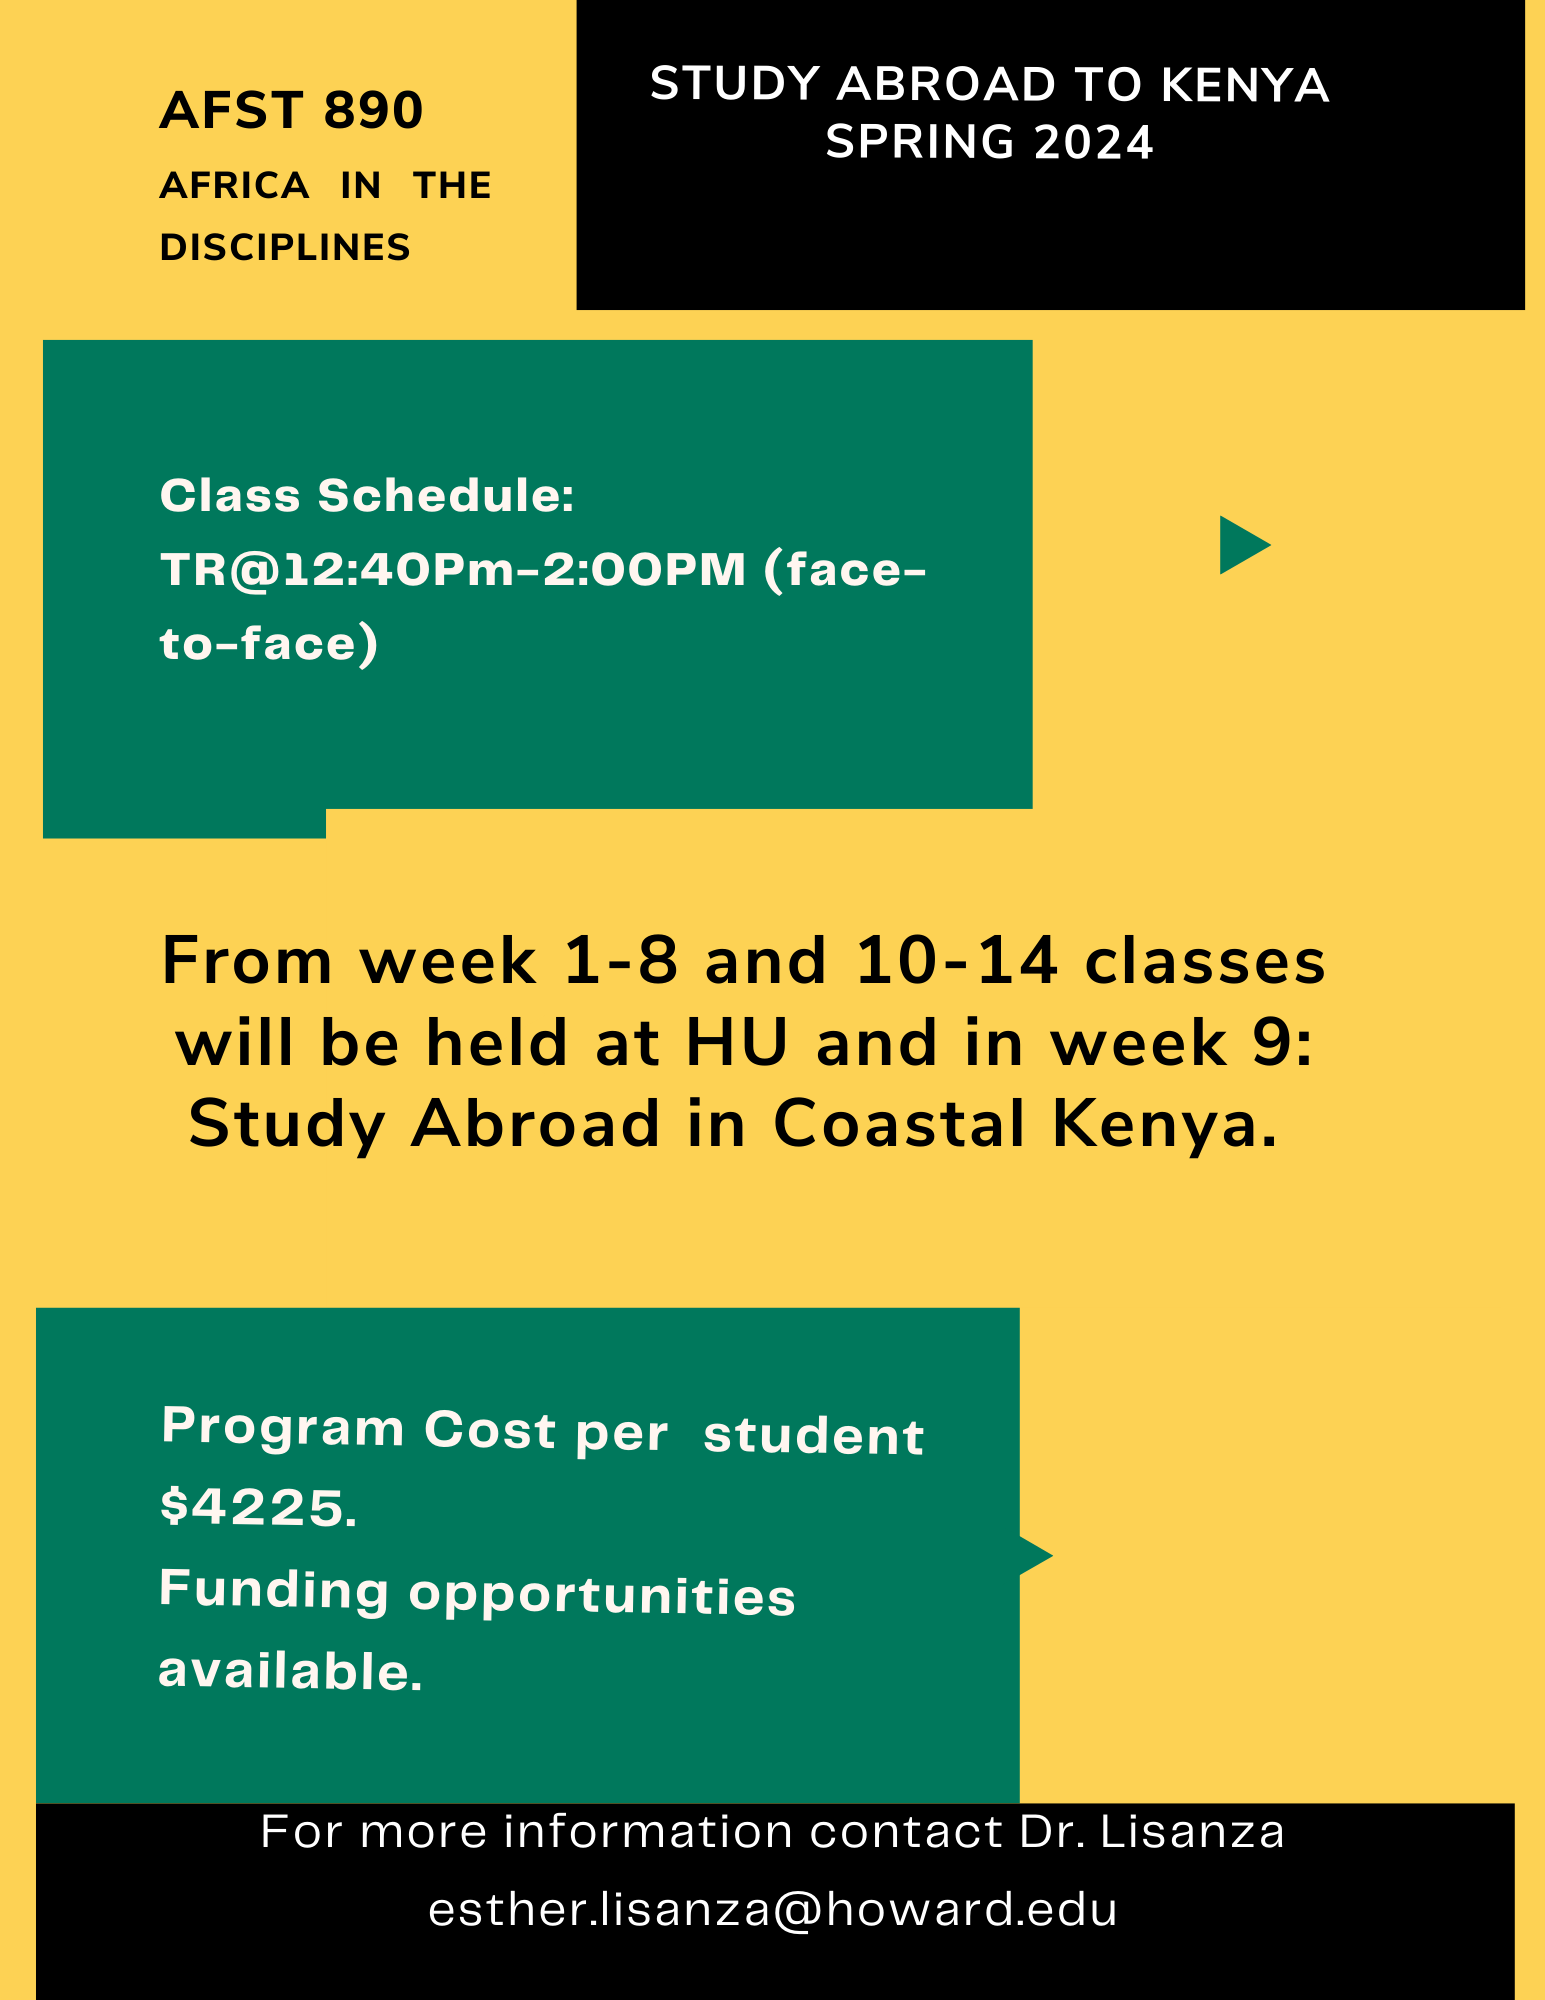 AFST 890 Study Abroad